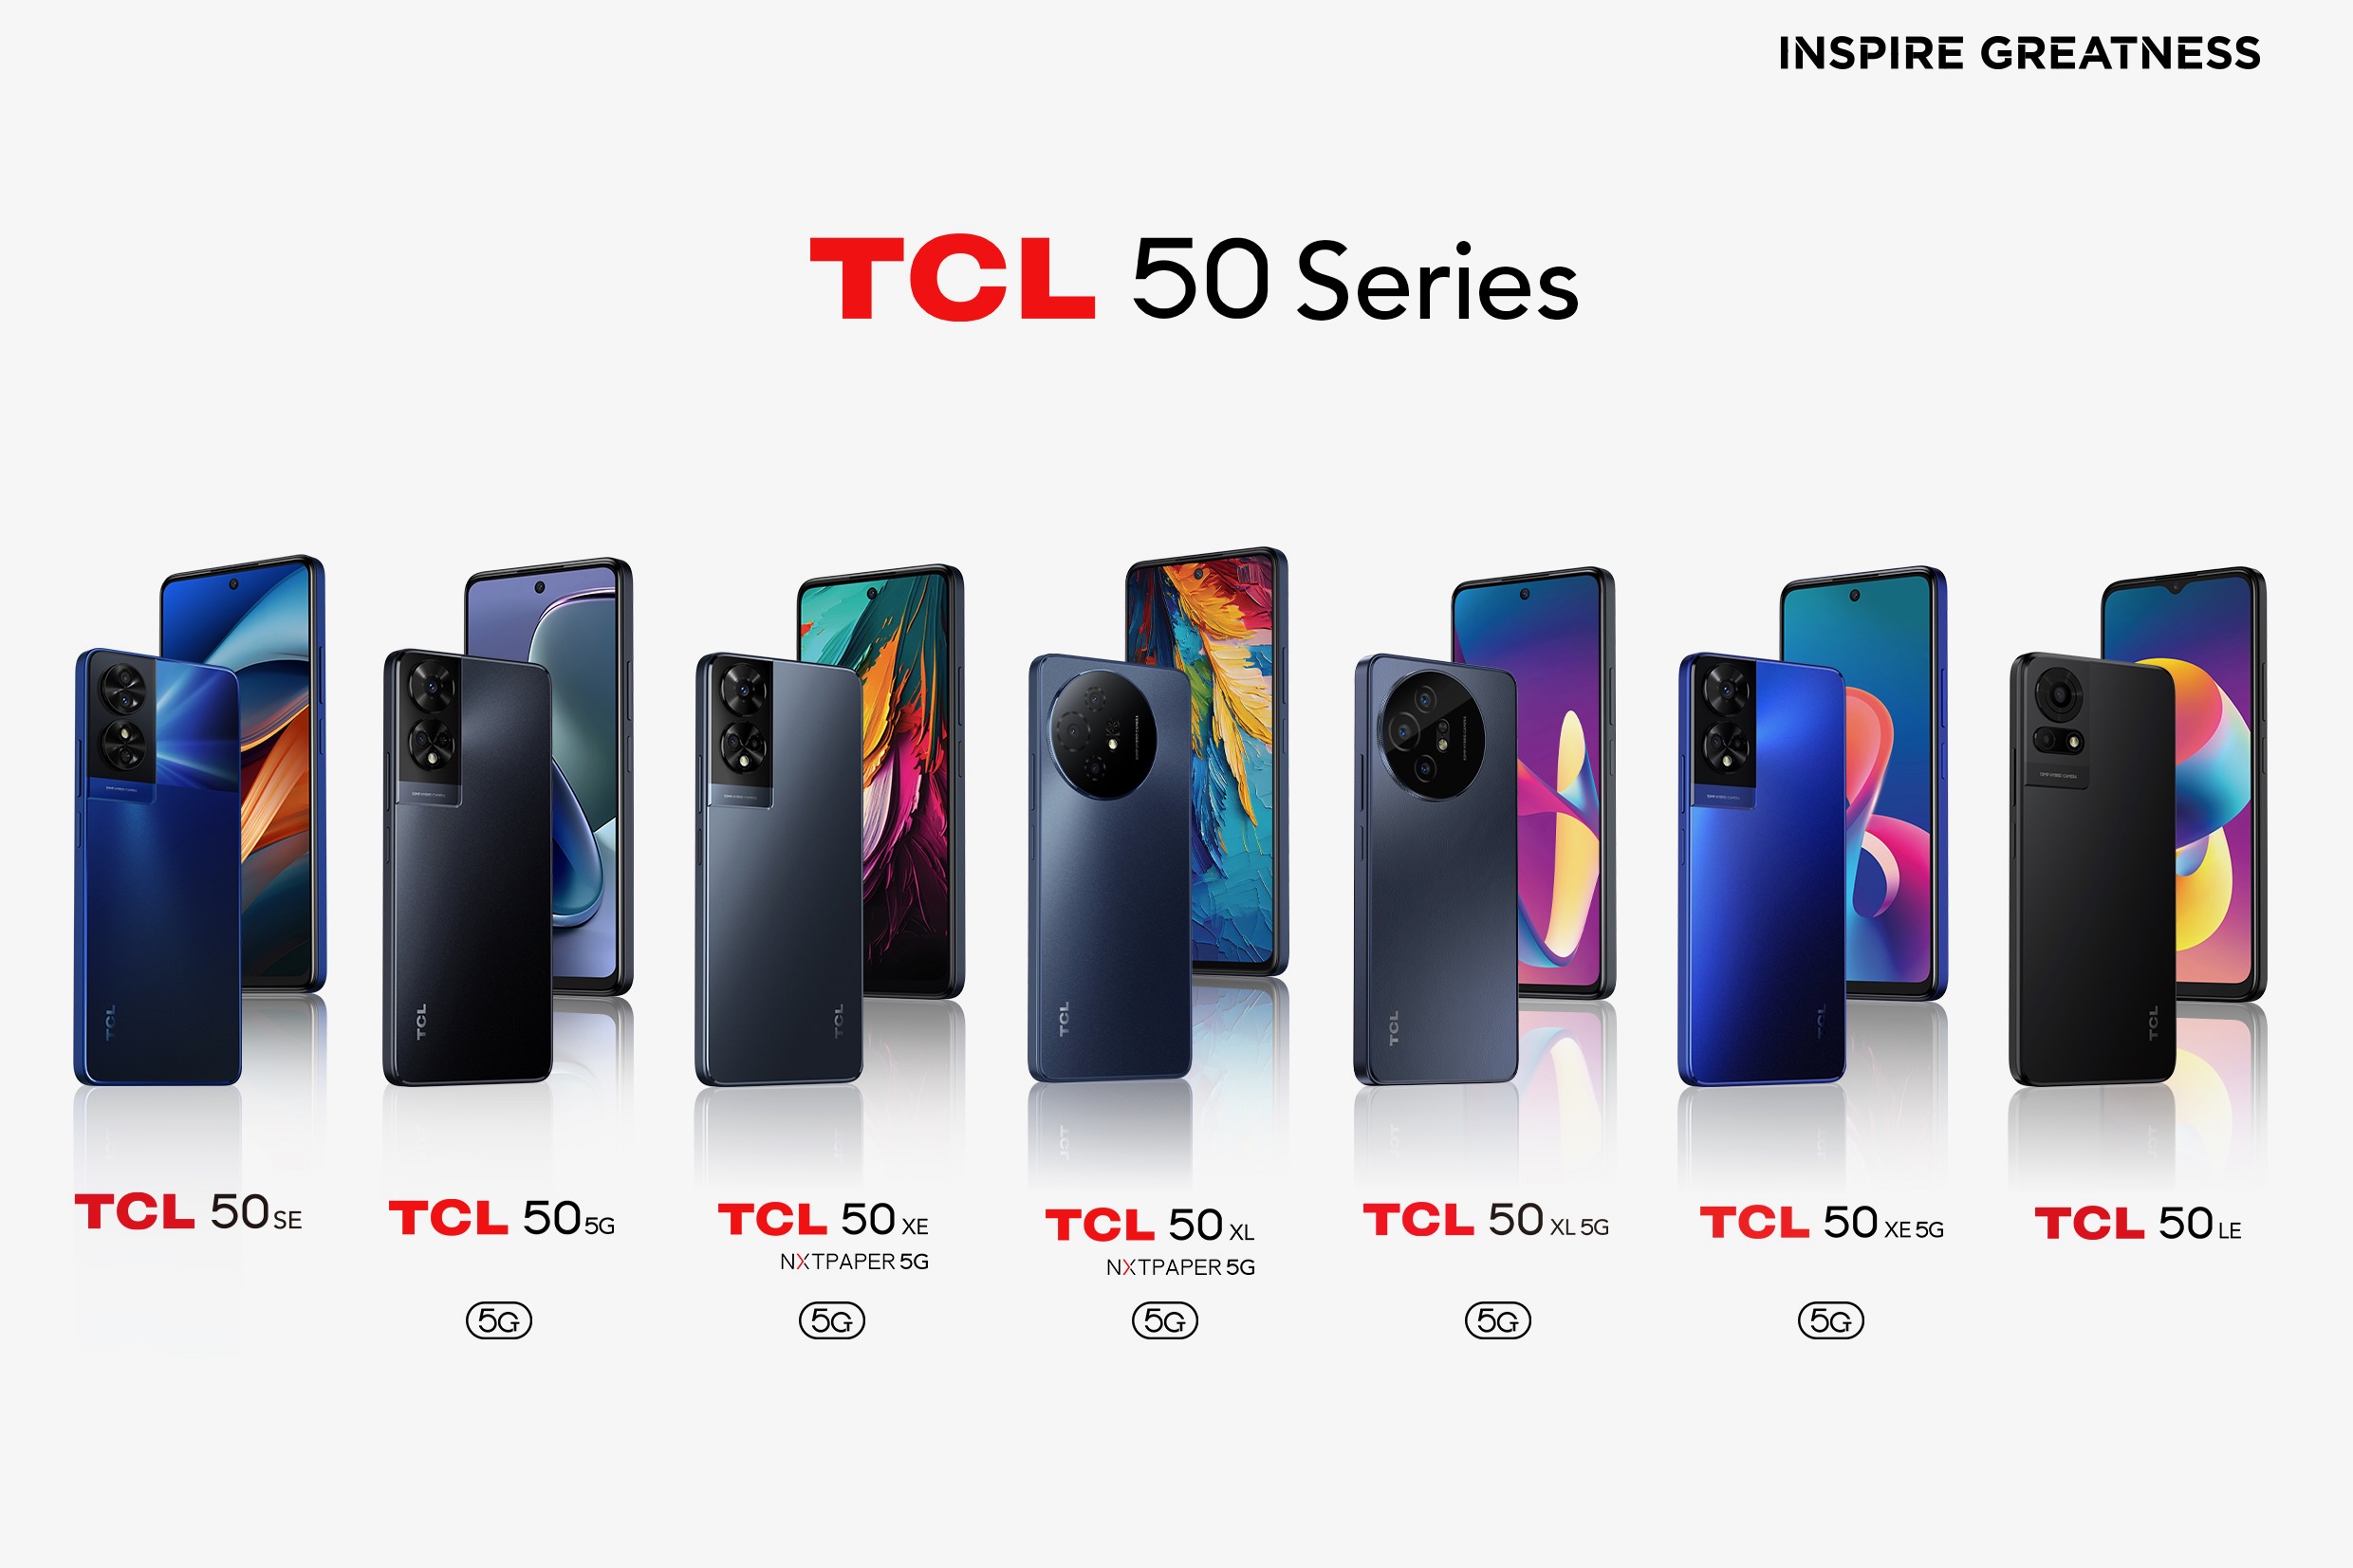 TCL just announced an insane number of Android phones at CES